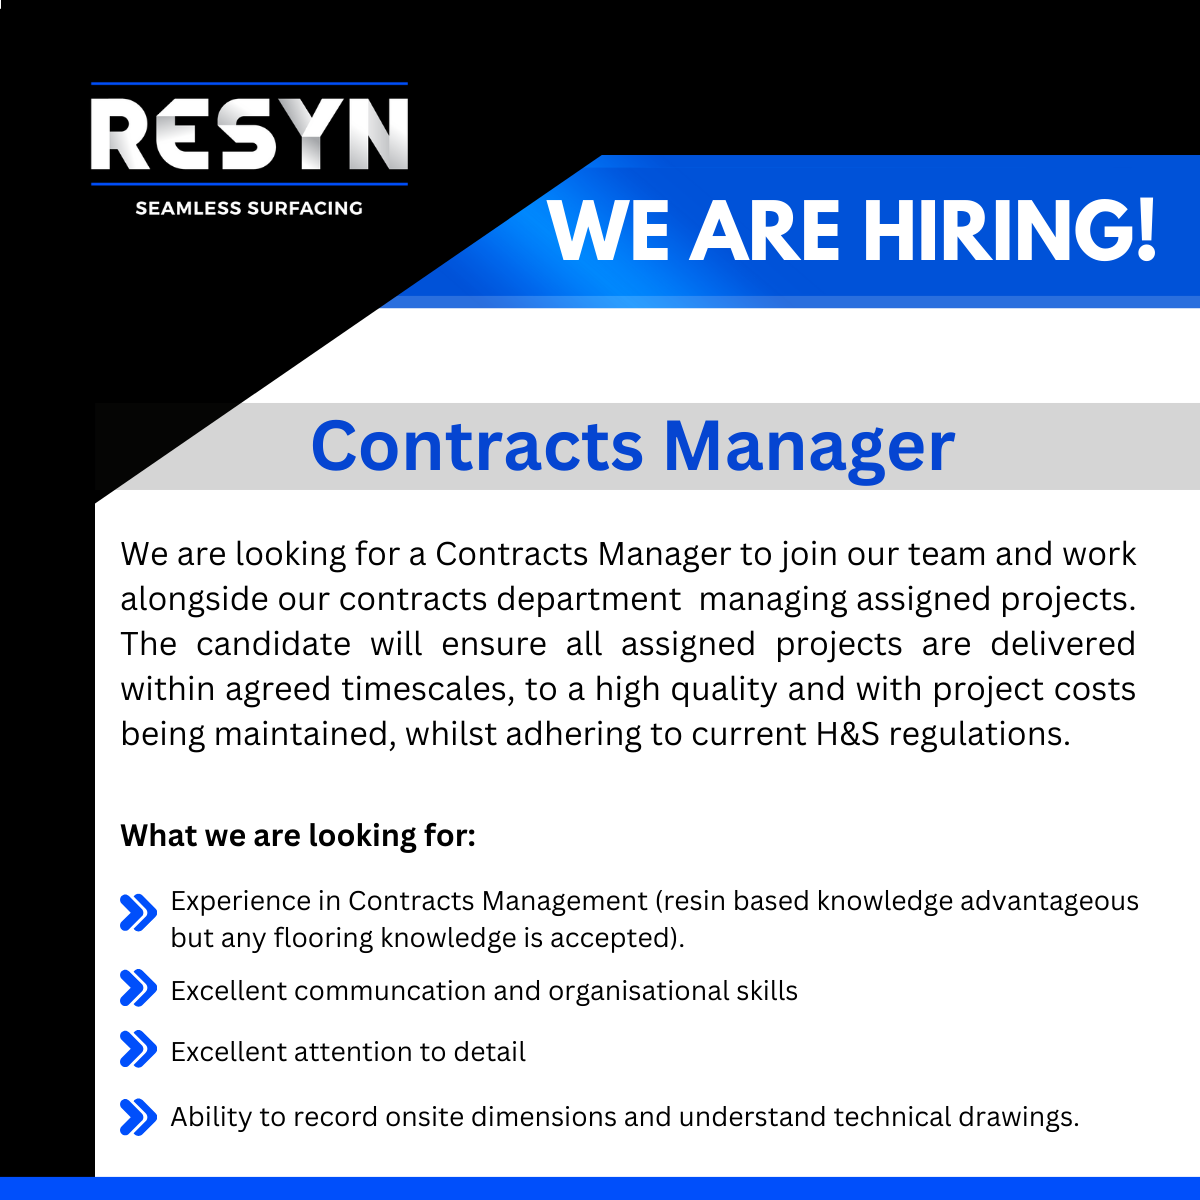 Resyn - We are hiring - Contracts Manager